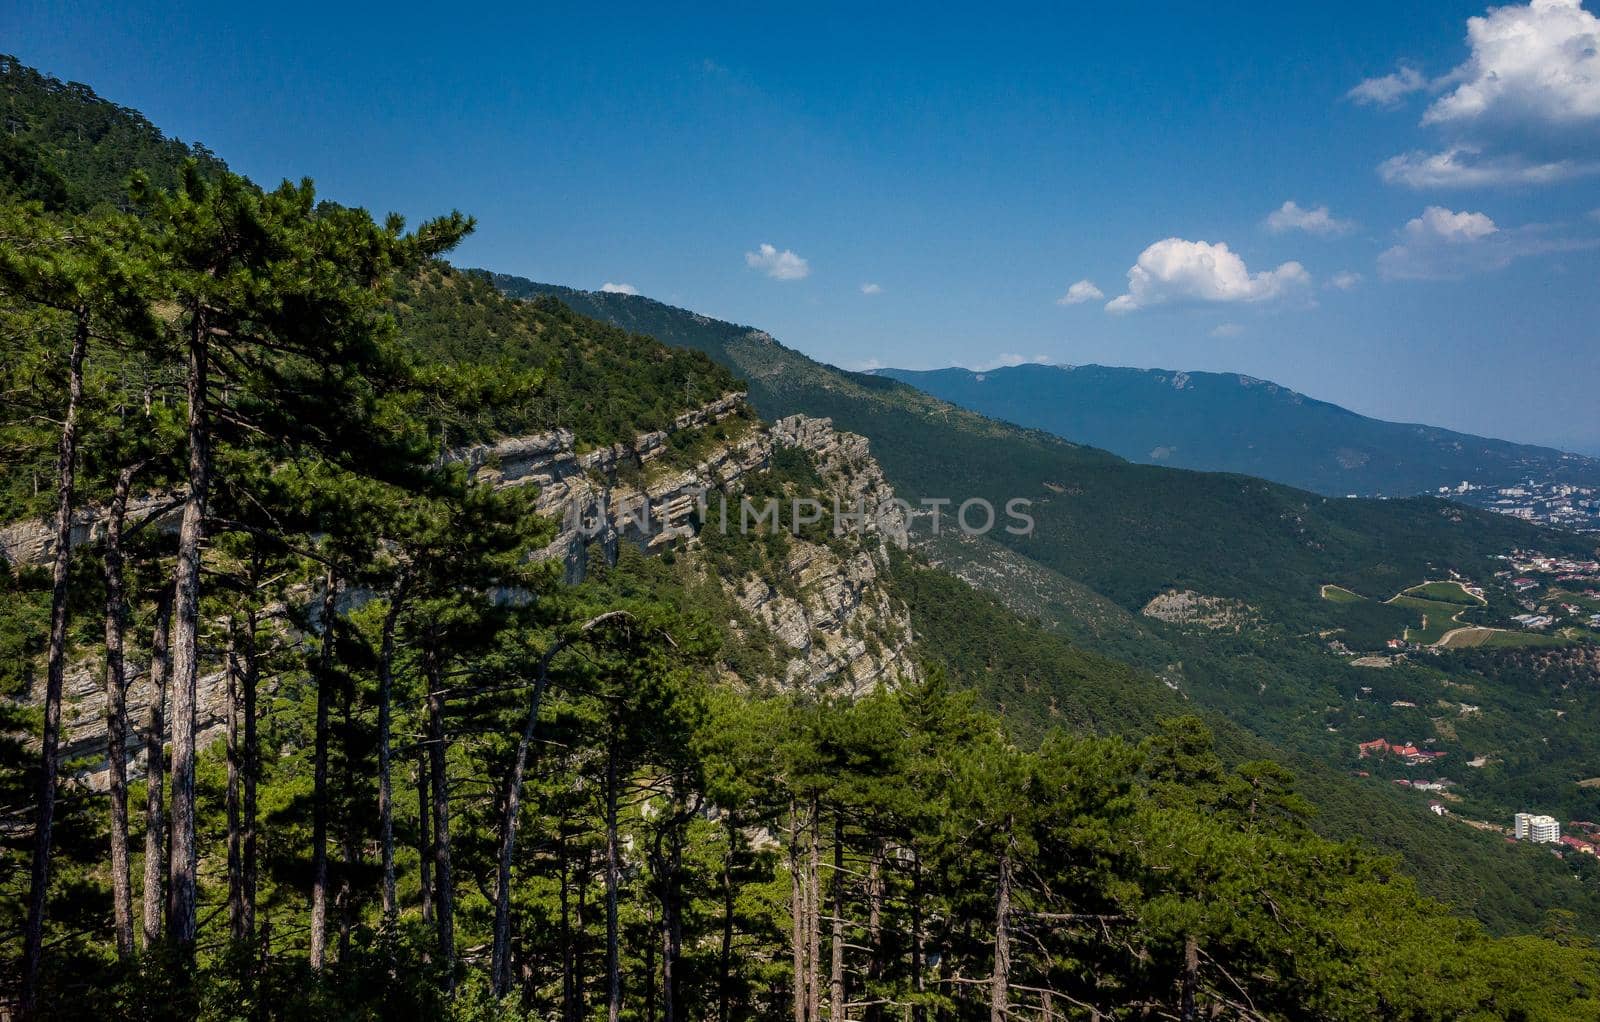 Pine trees on the rocks on the mountain slope of the South Coast of Crimea.